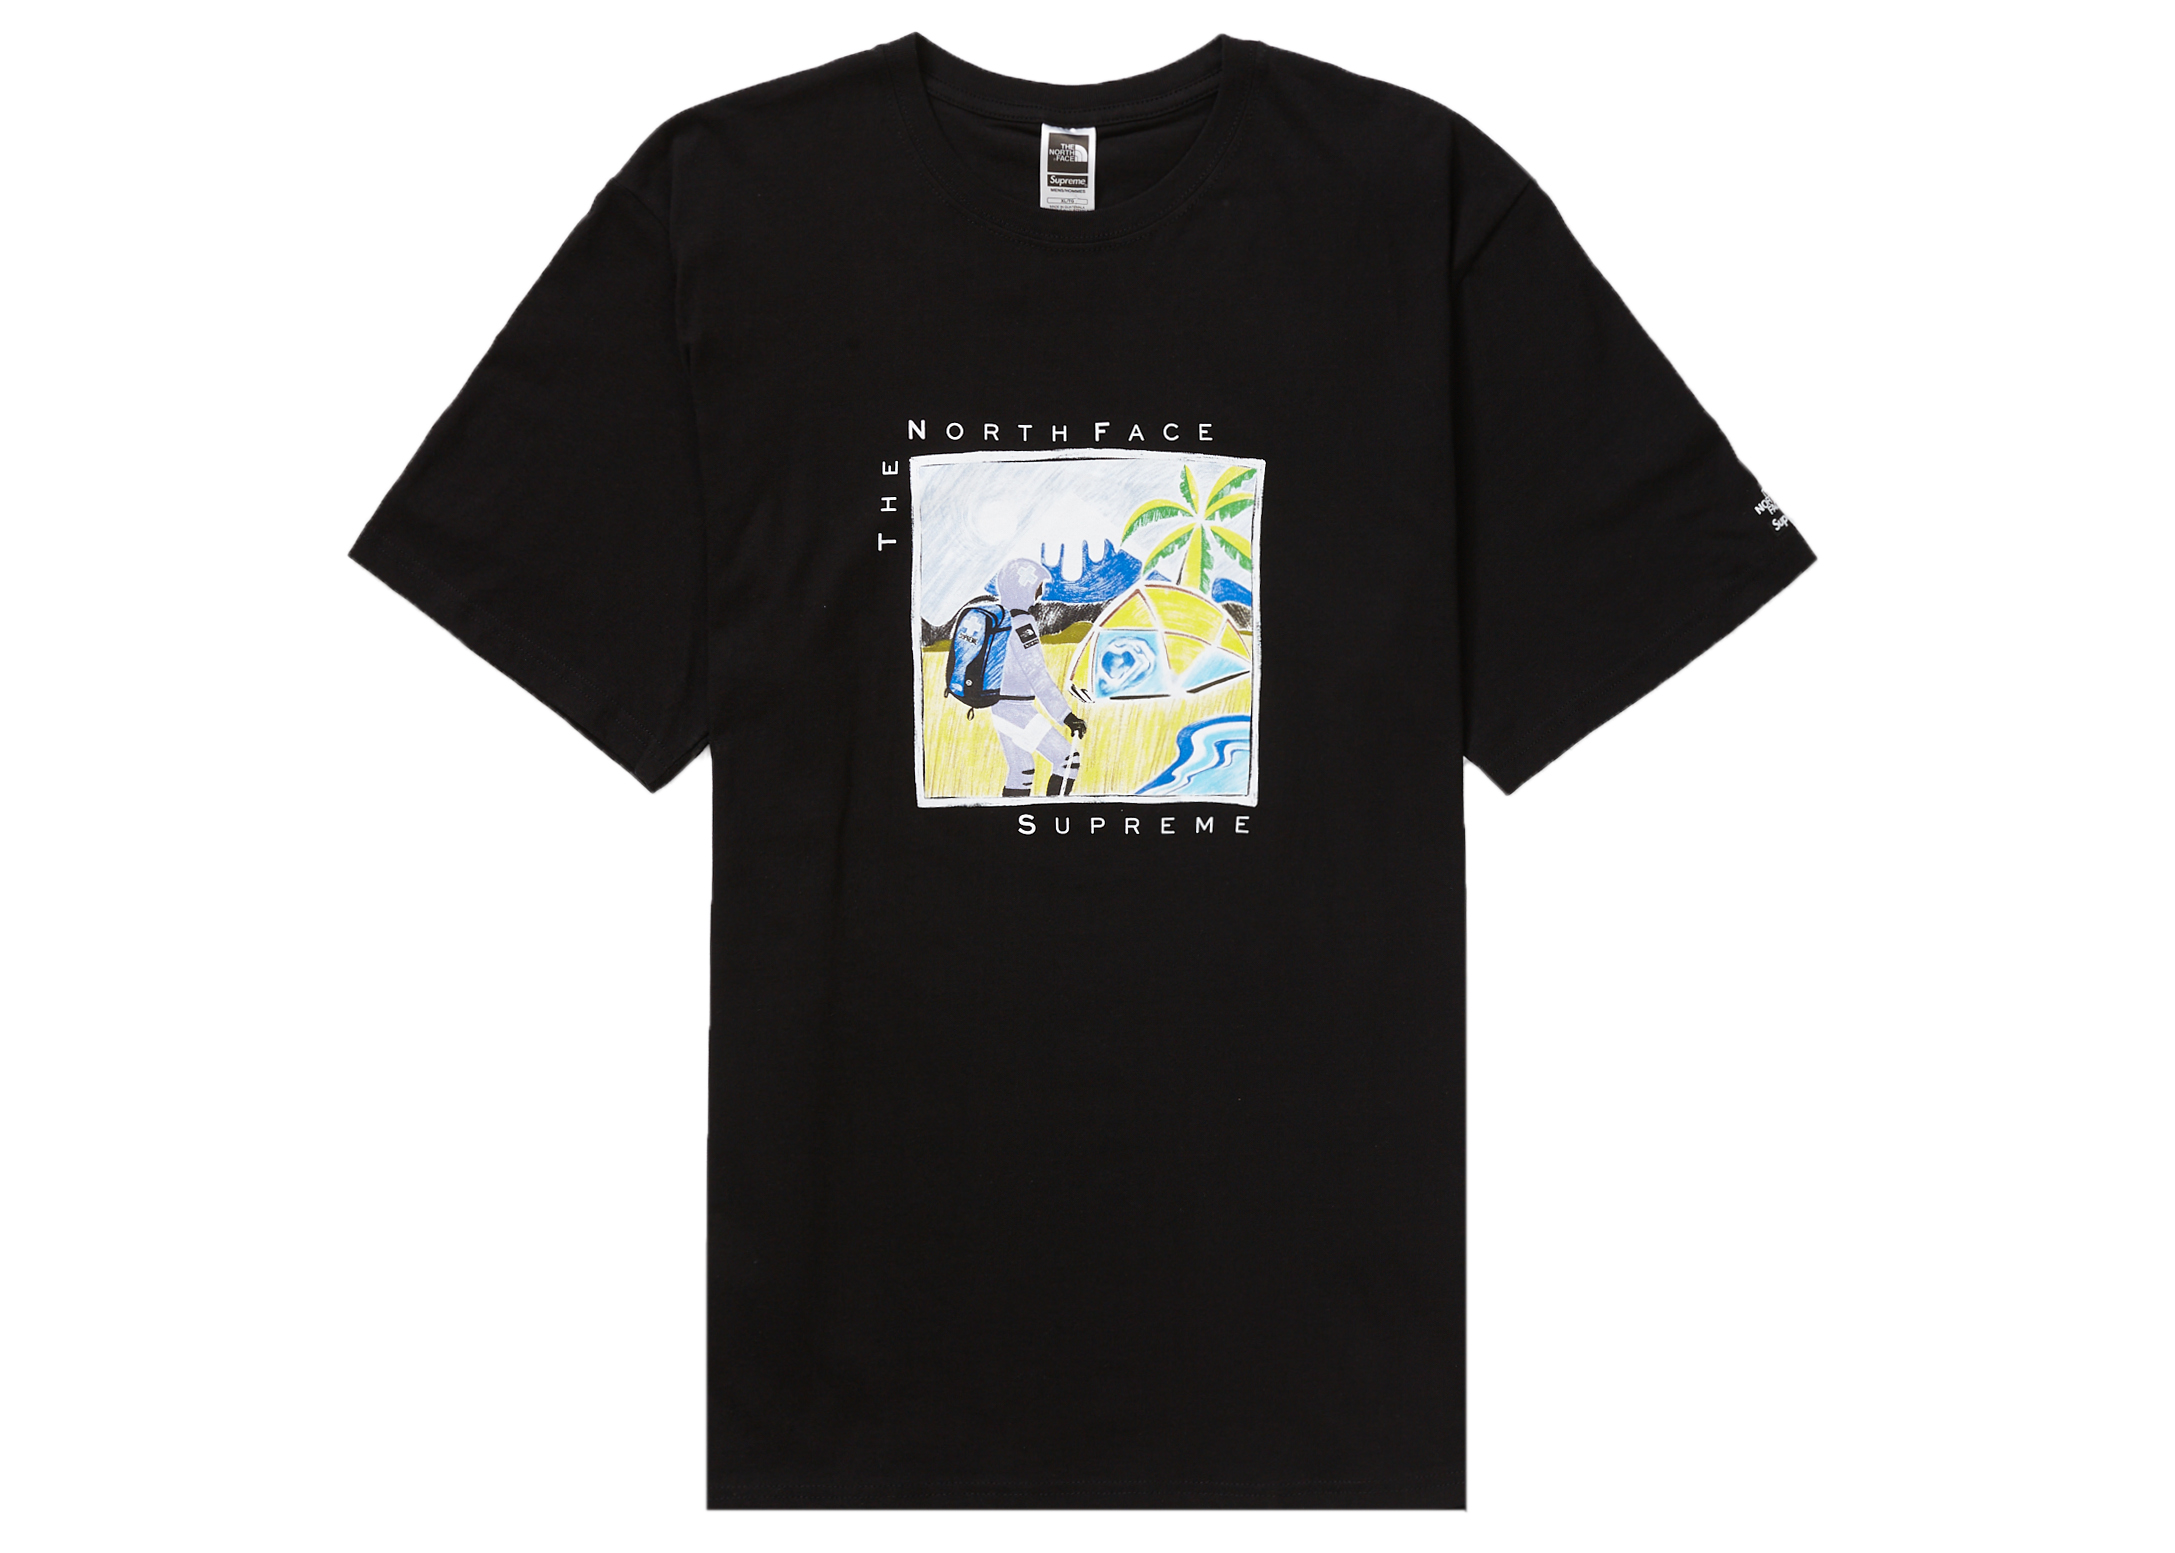 XlaSupreme x The North Face S/S Top Black